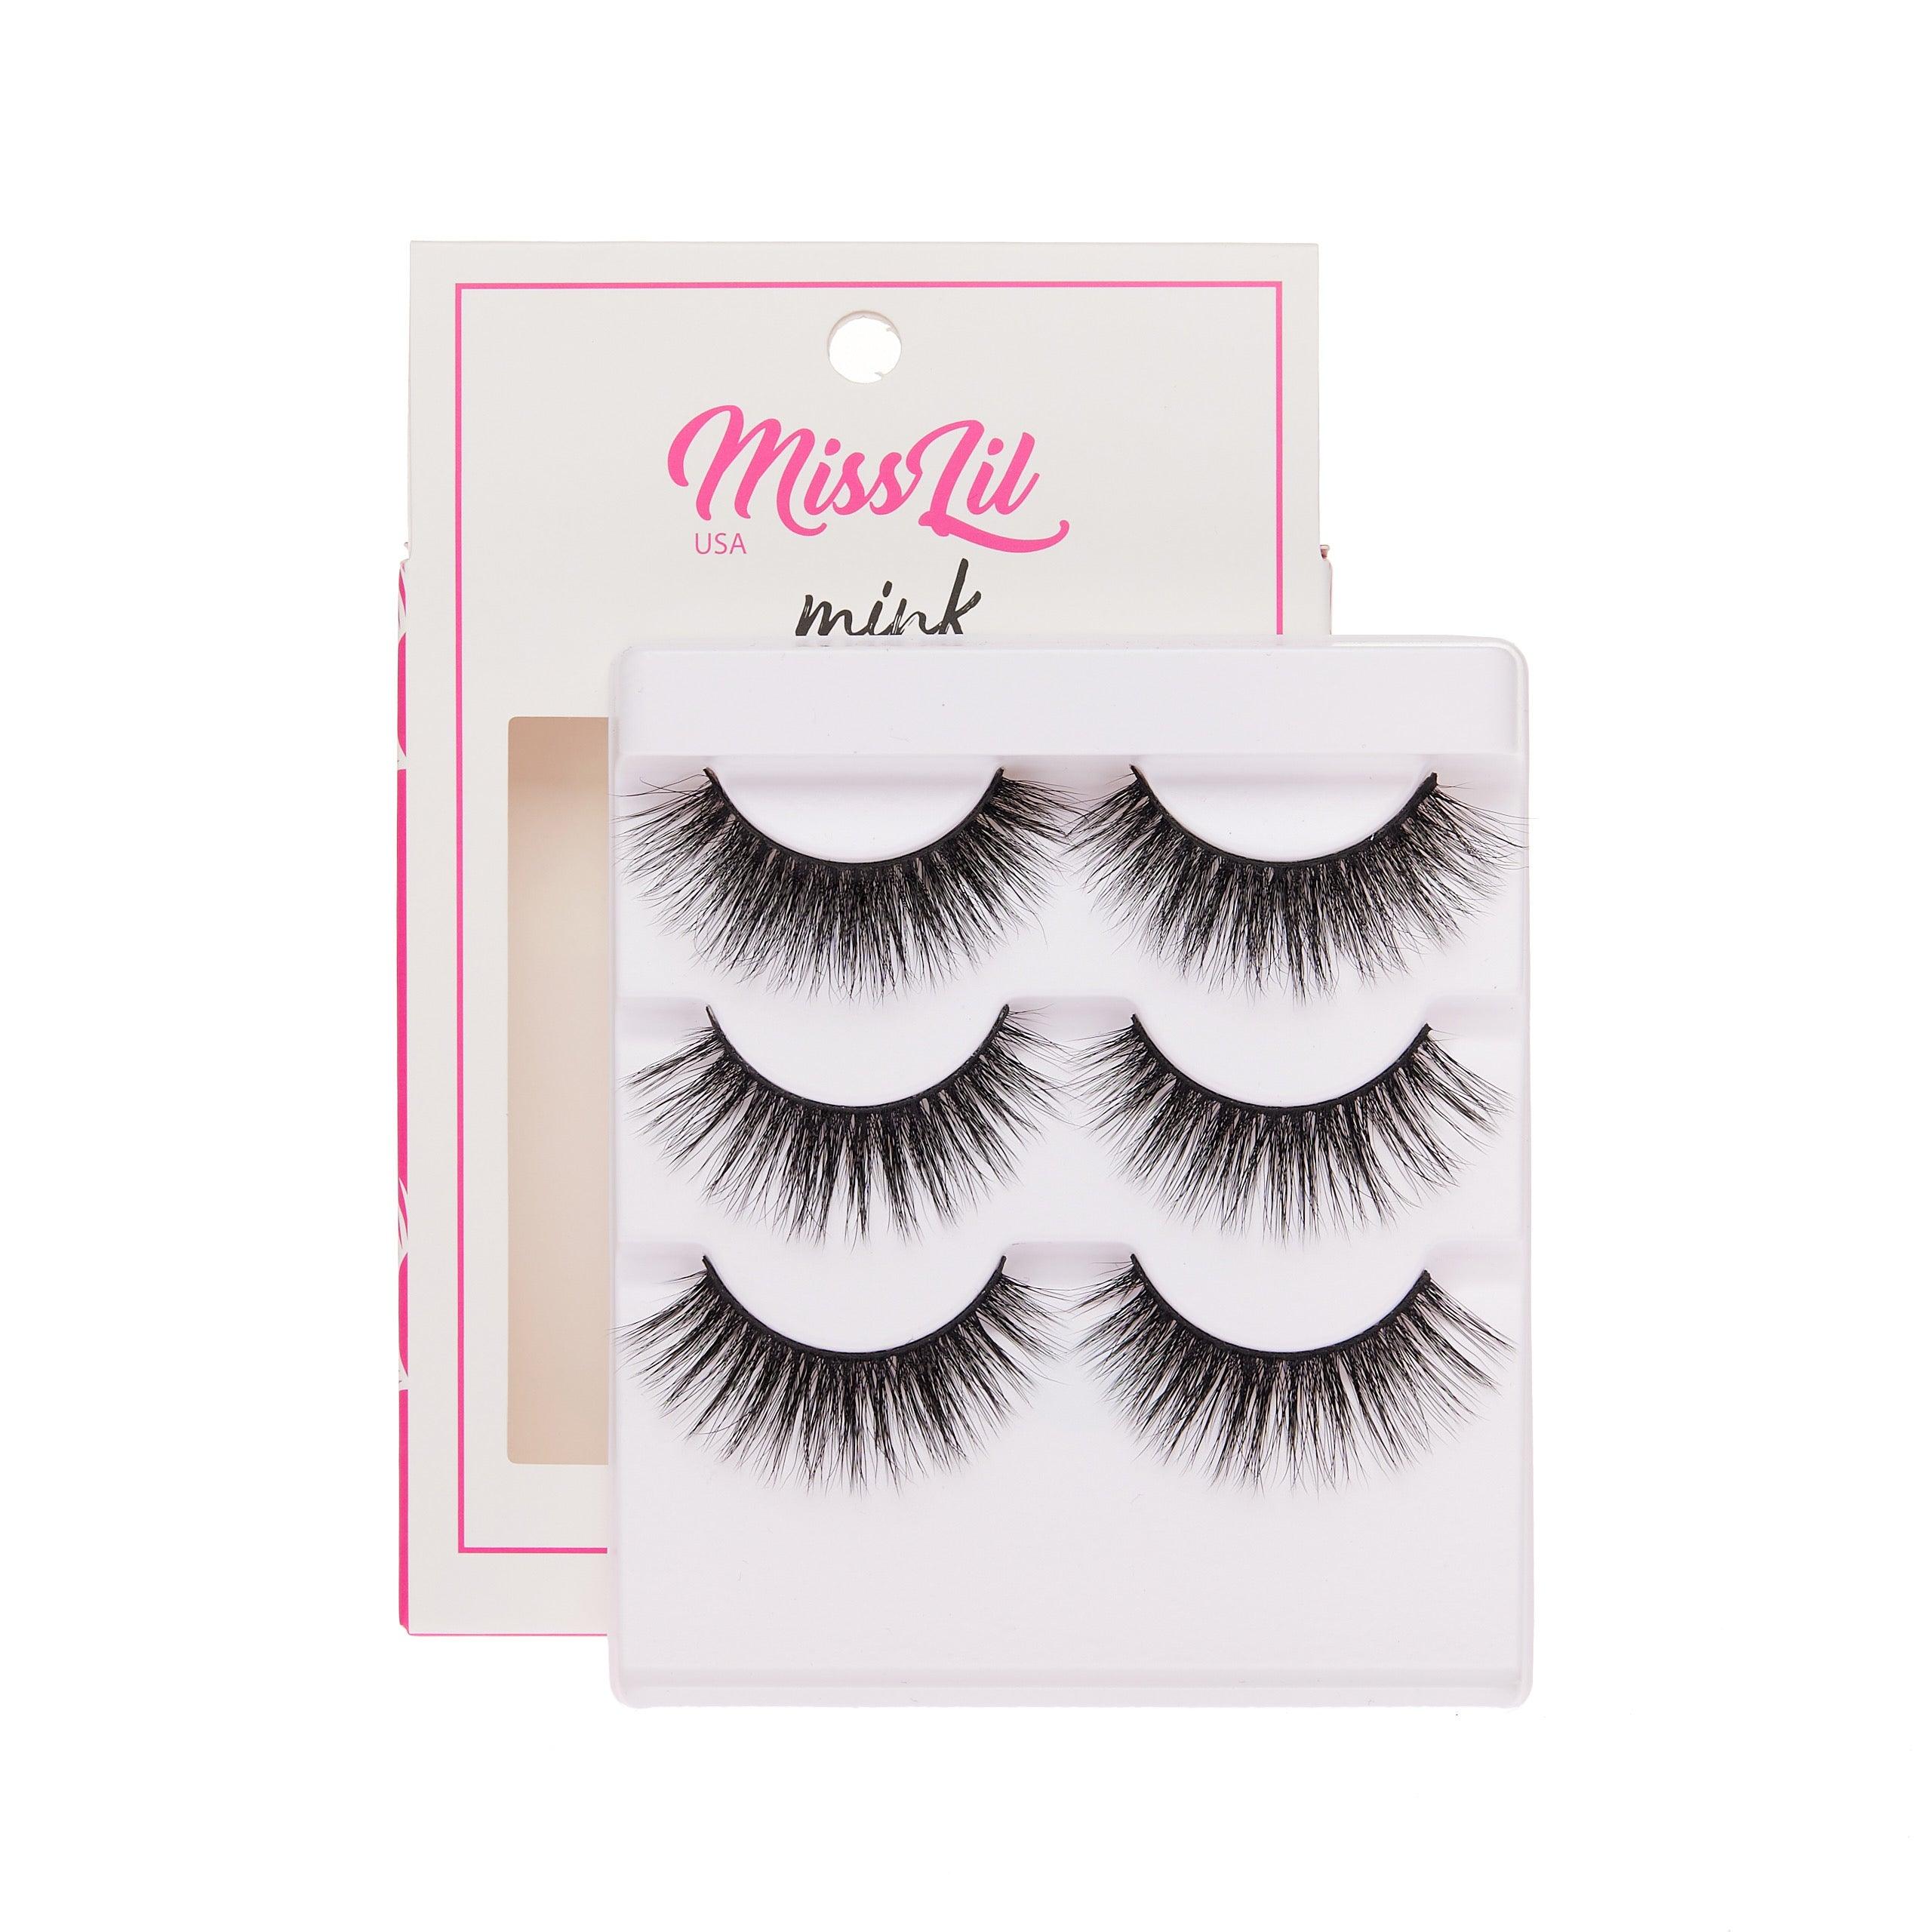 3-Pair Faux Mink Effect Eyelashes - Lash Party Collection number 3 - 3 pack